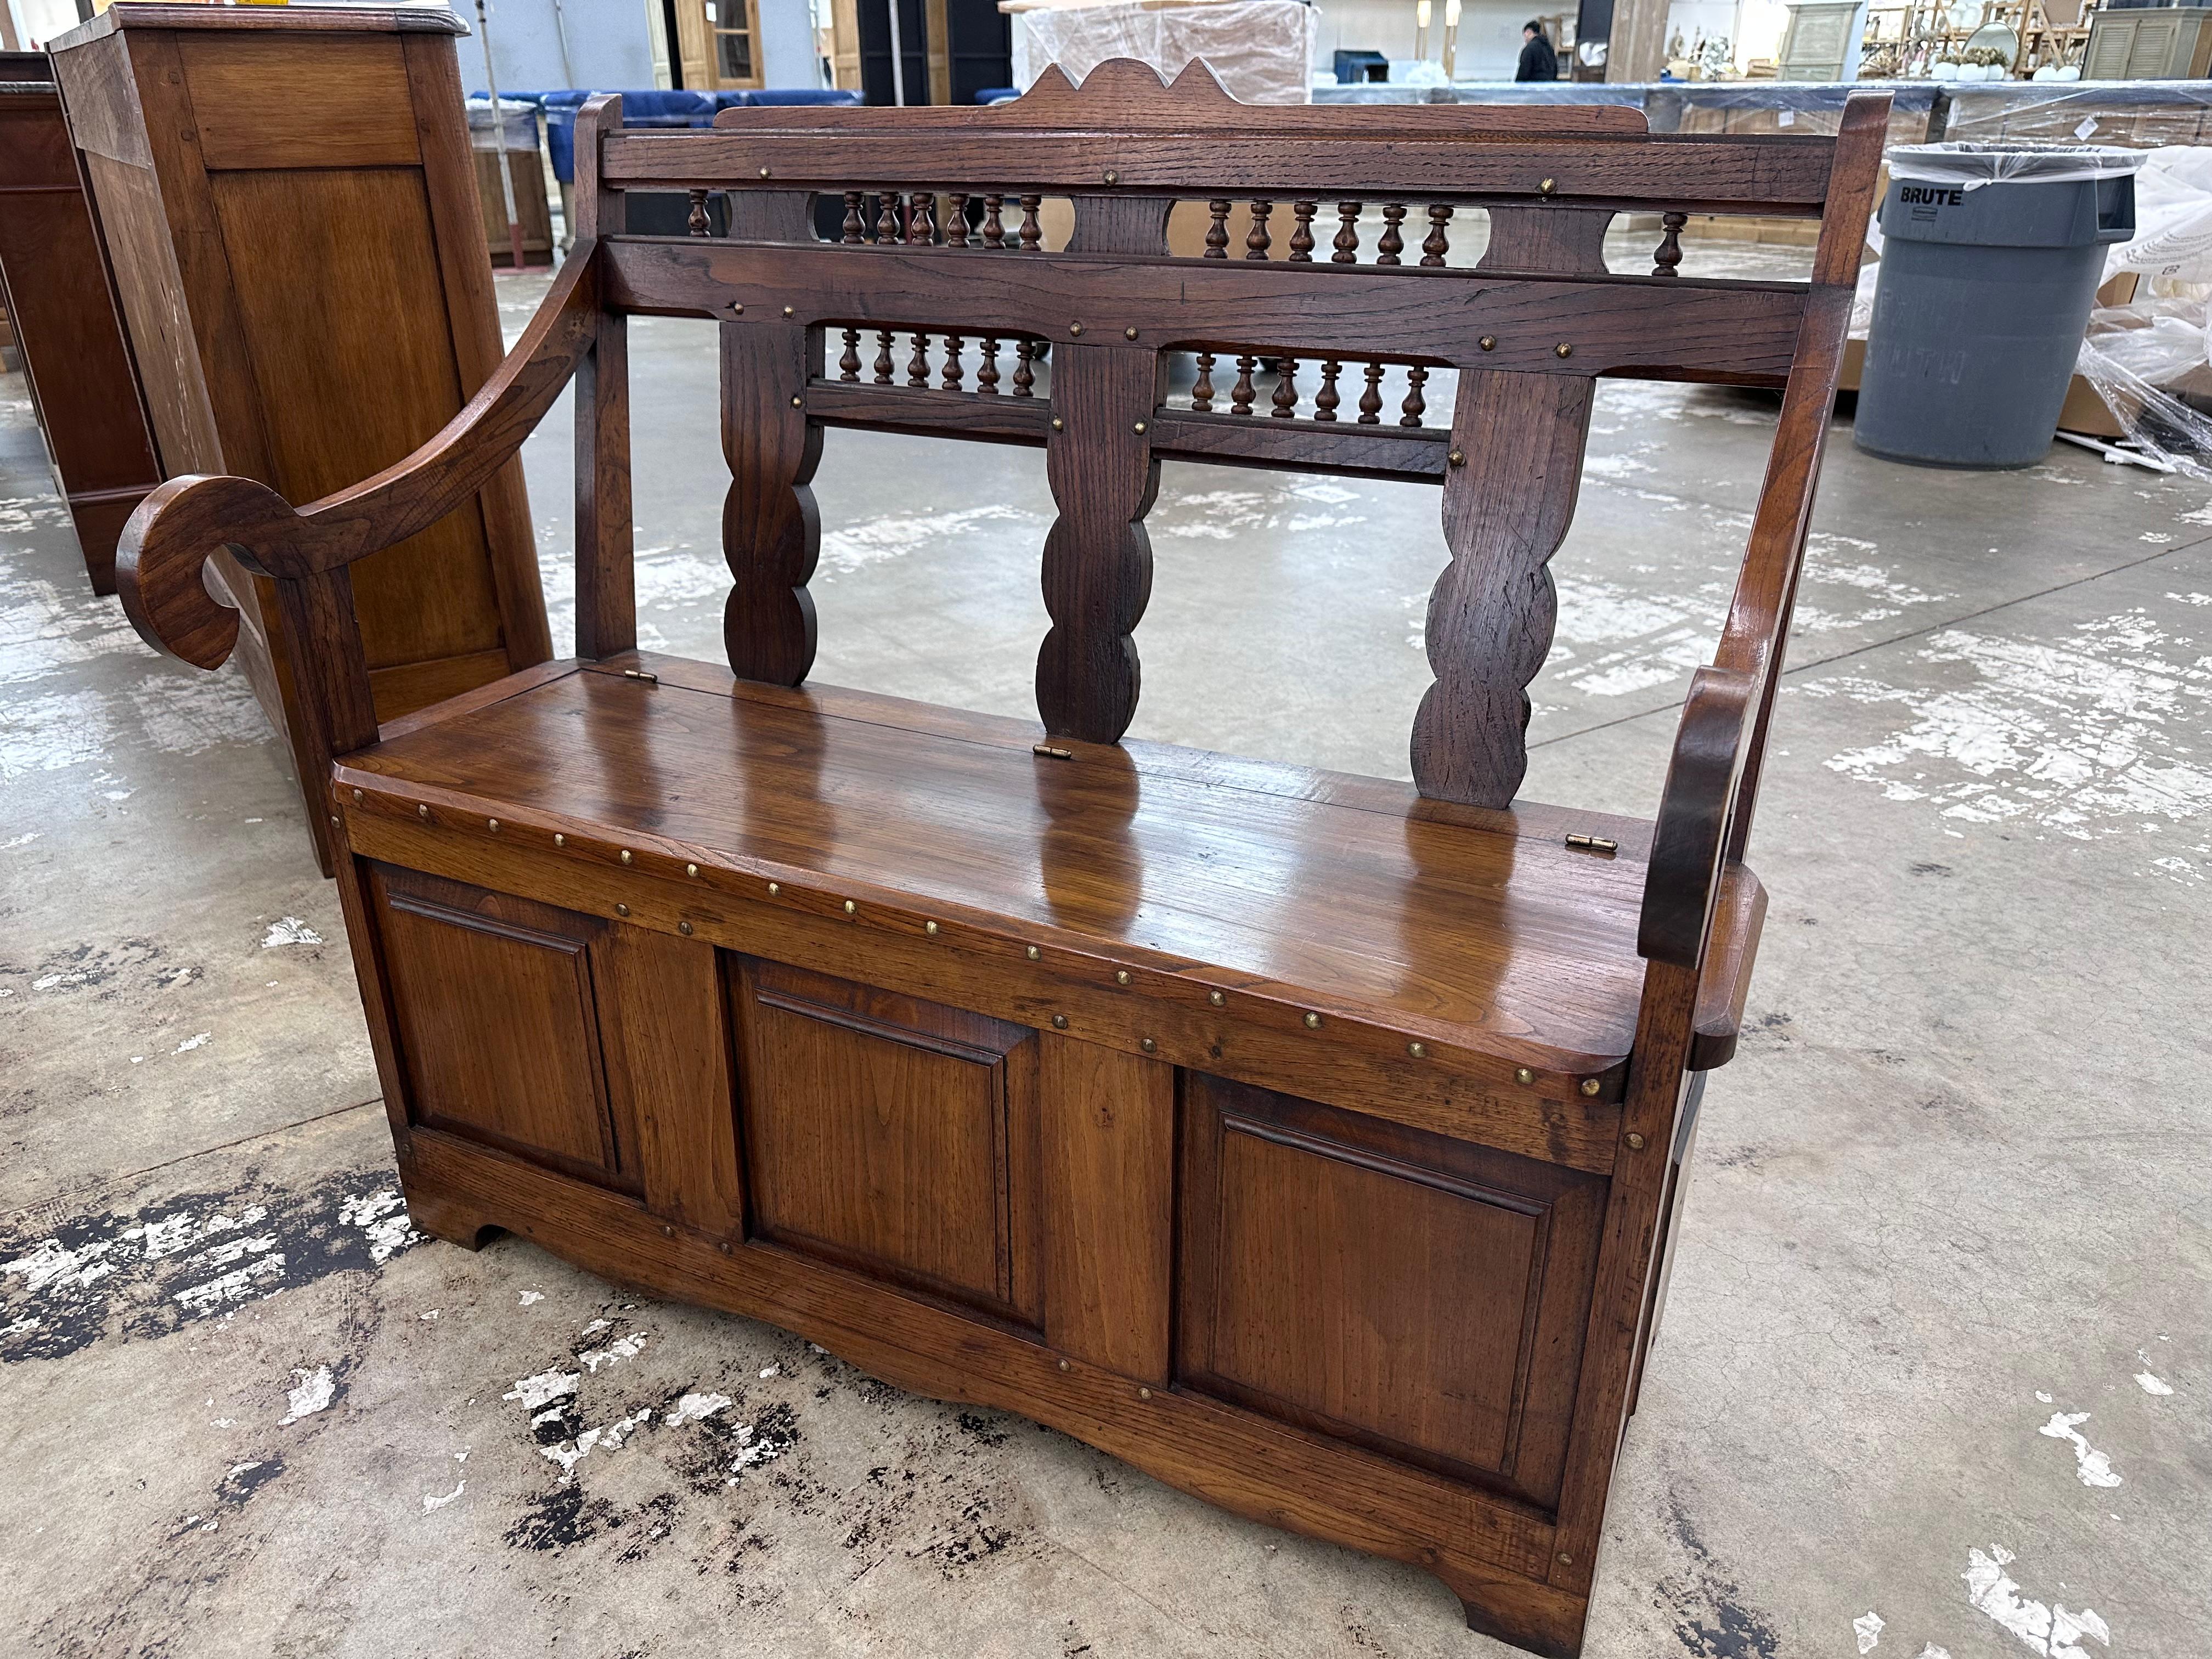 This is an amazing antique piece! Dating to the early 19th century, this bench/coffer combo has a simple but appealing design. Slightly inset drawer panels, curved back with turned spindles, and gently curving arms are nicely accented by brass nail